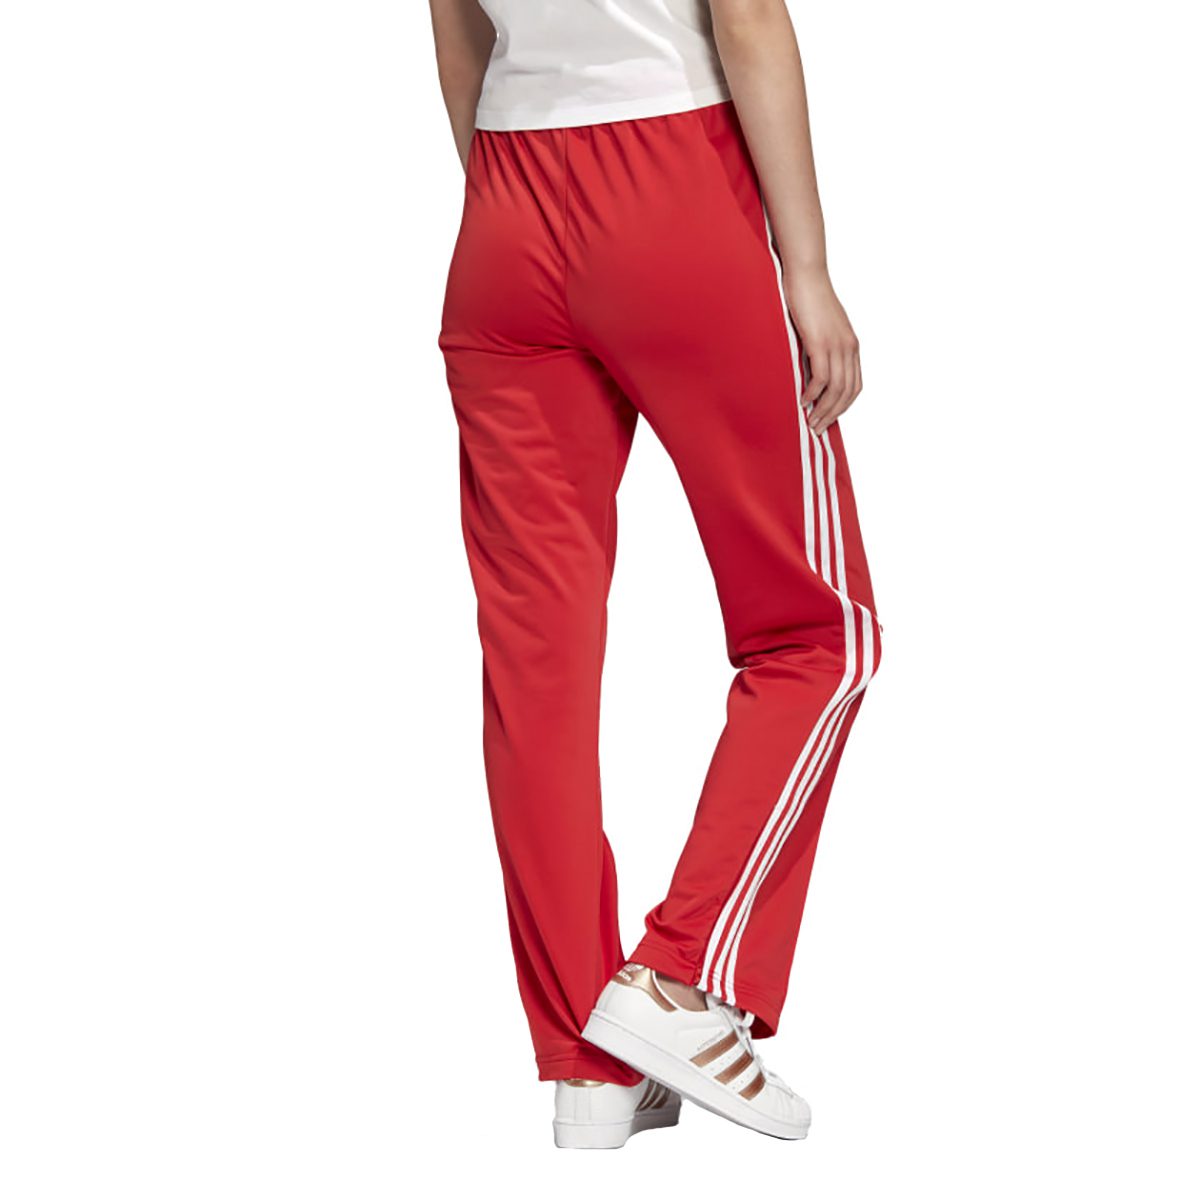 red and white adidas pants womens